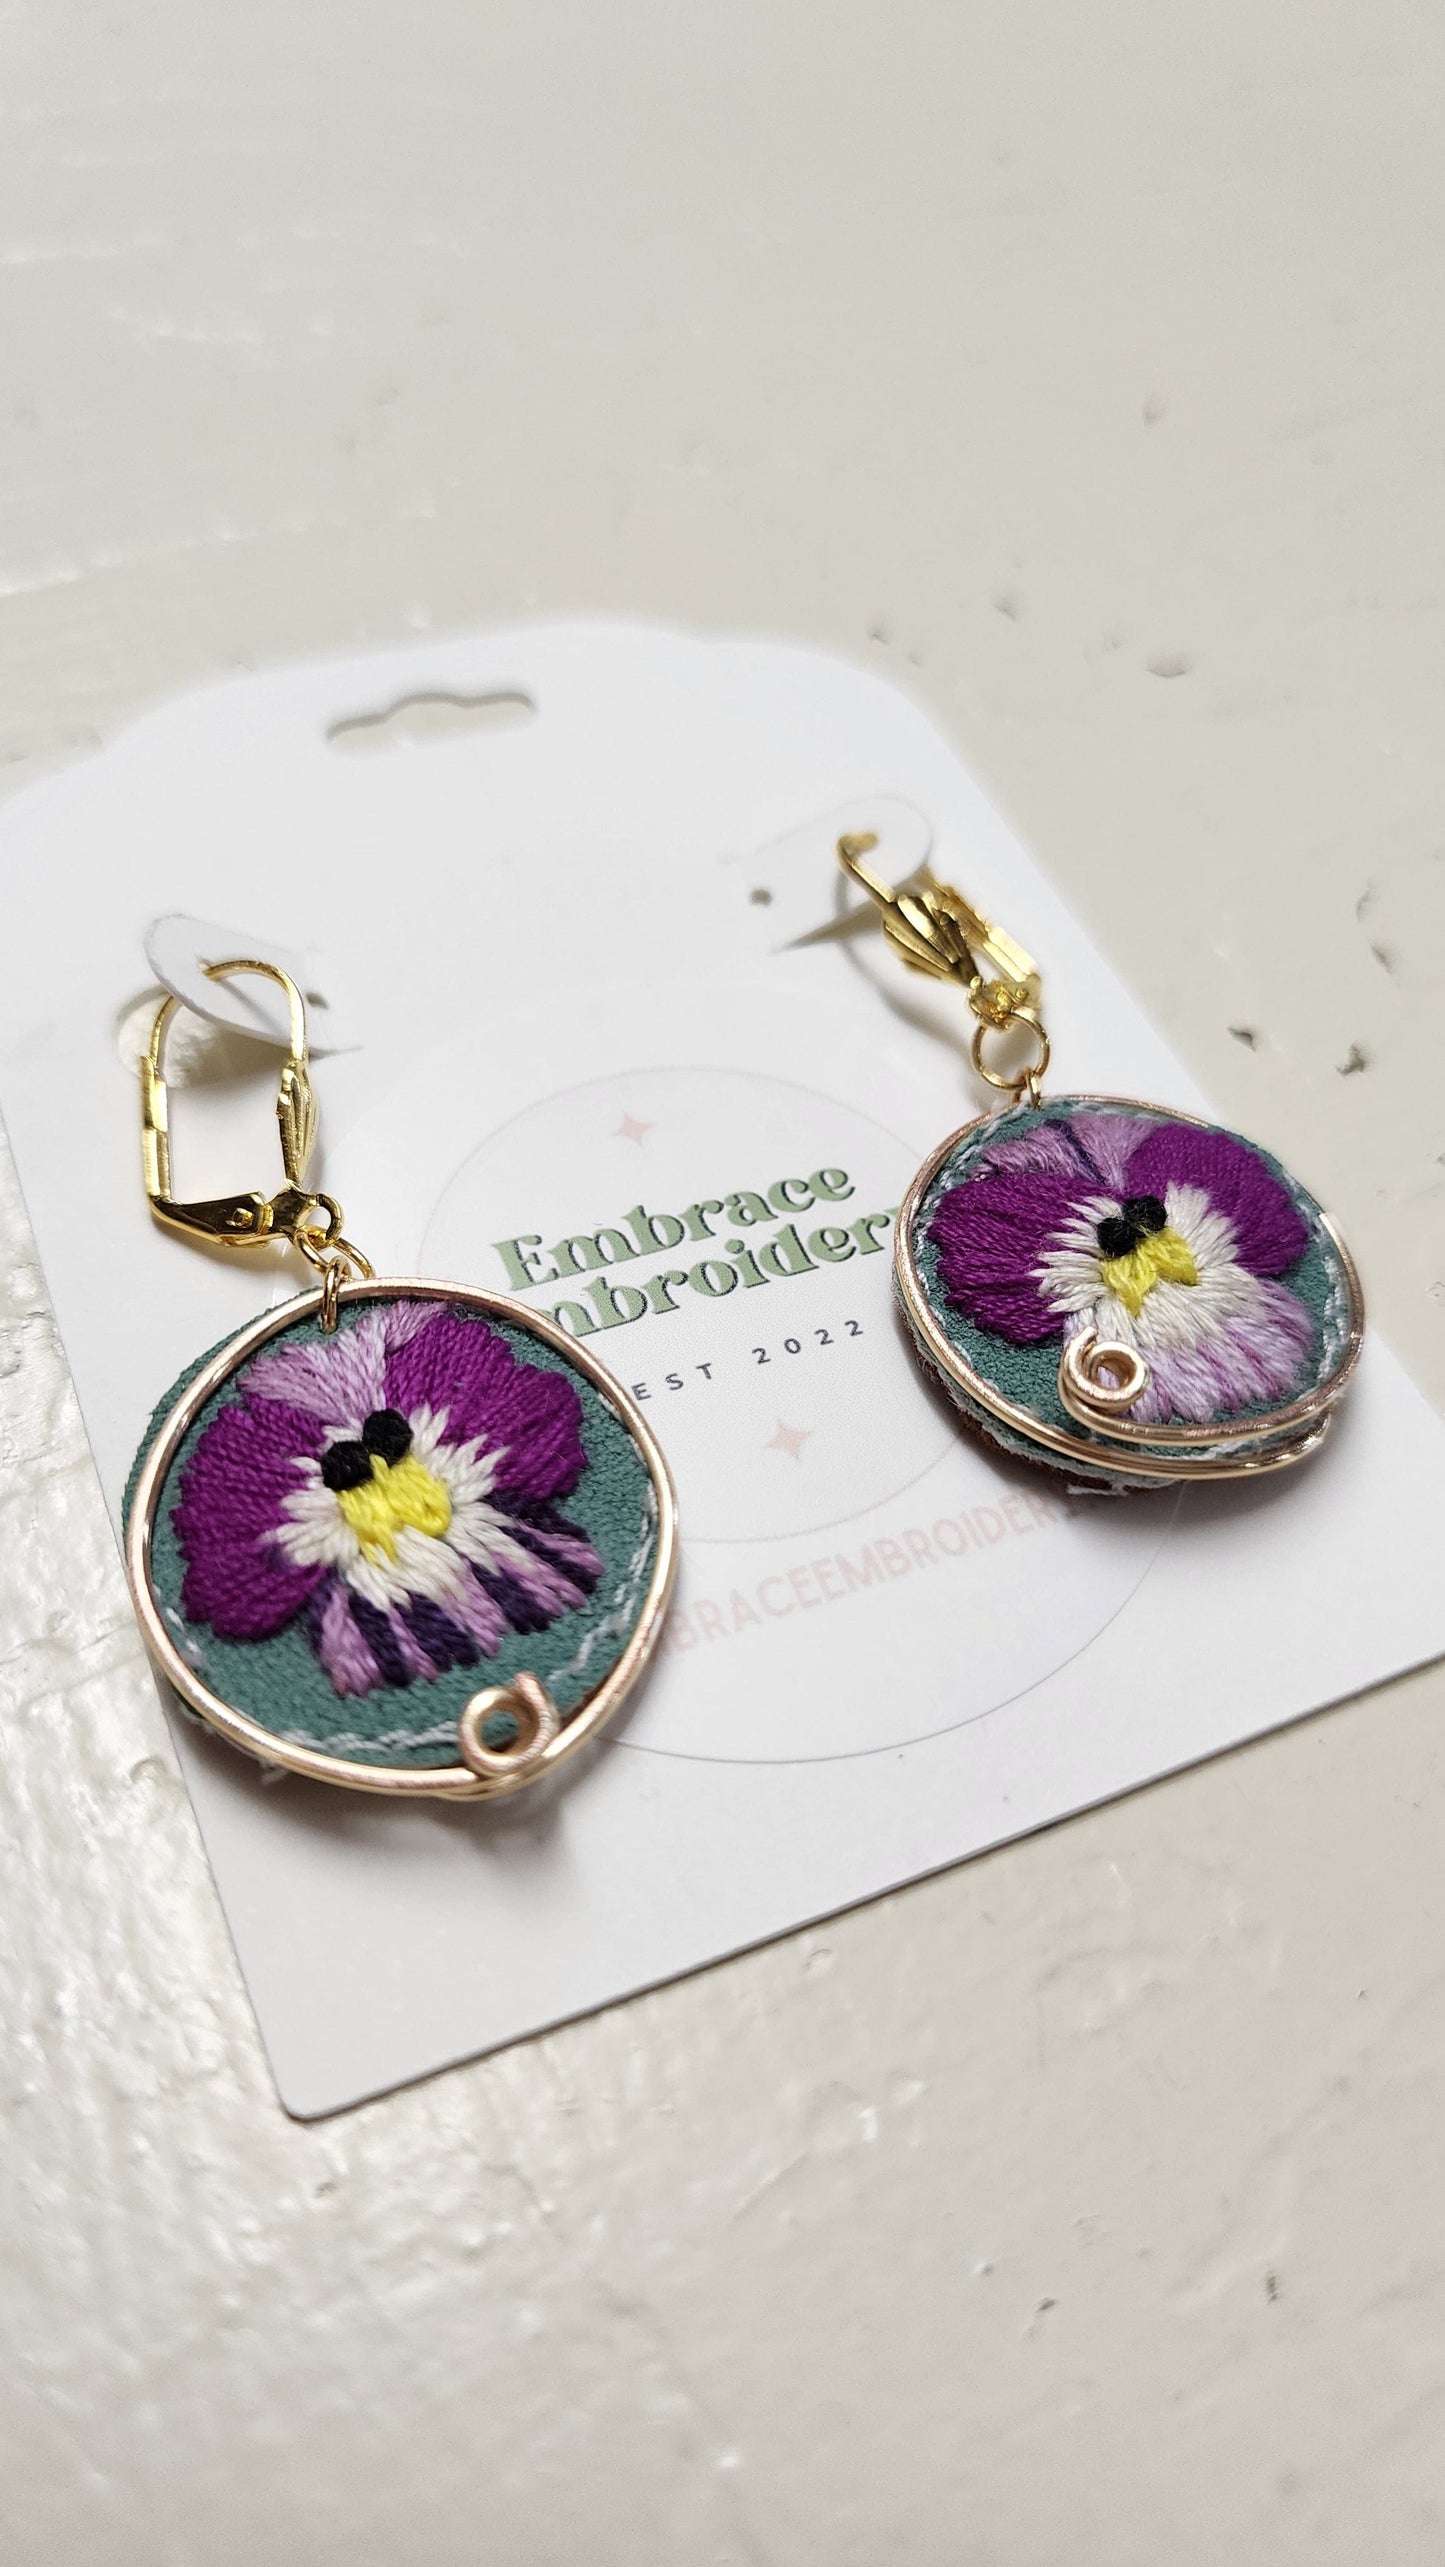 Embrace Embroidery Hand Embroidered Pansies Gold and Sued Dangle Earrings